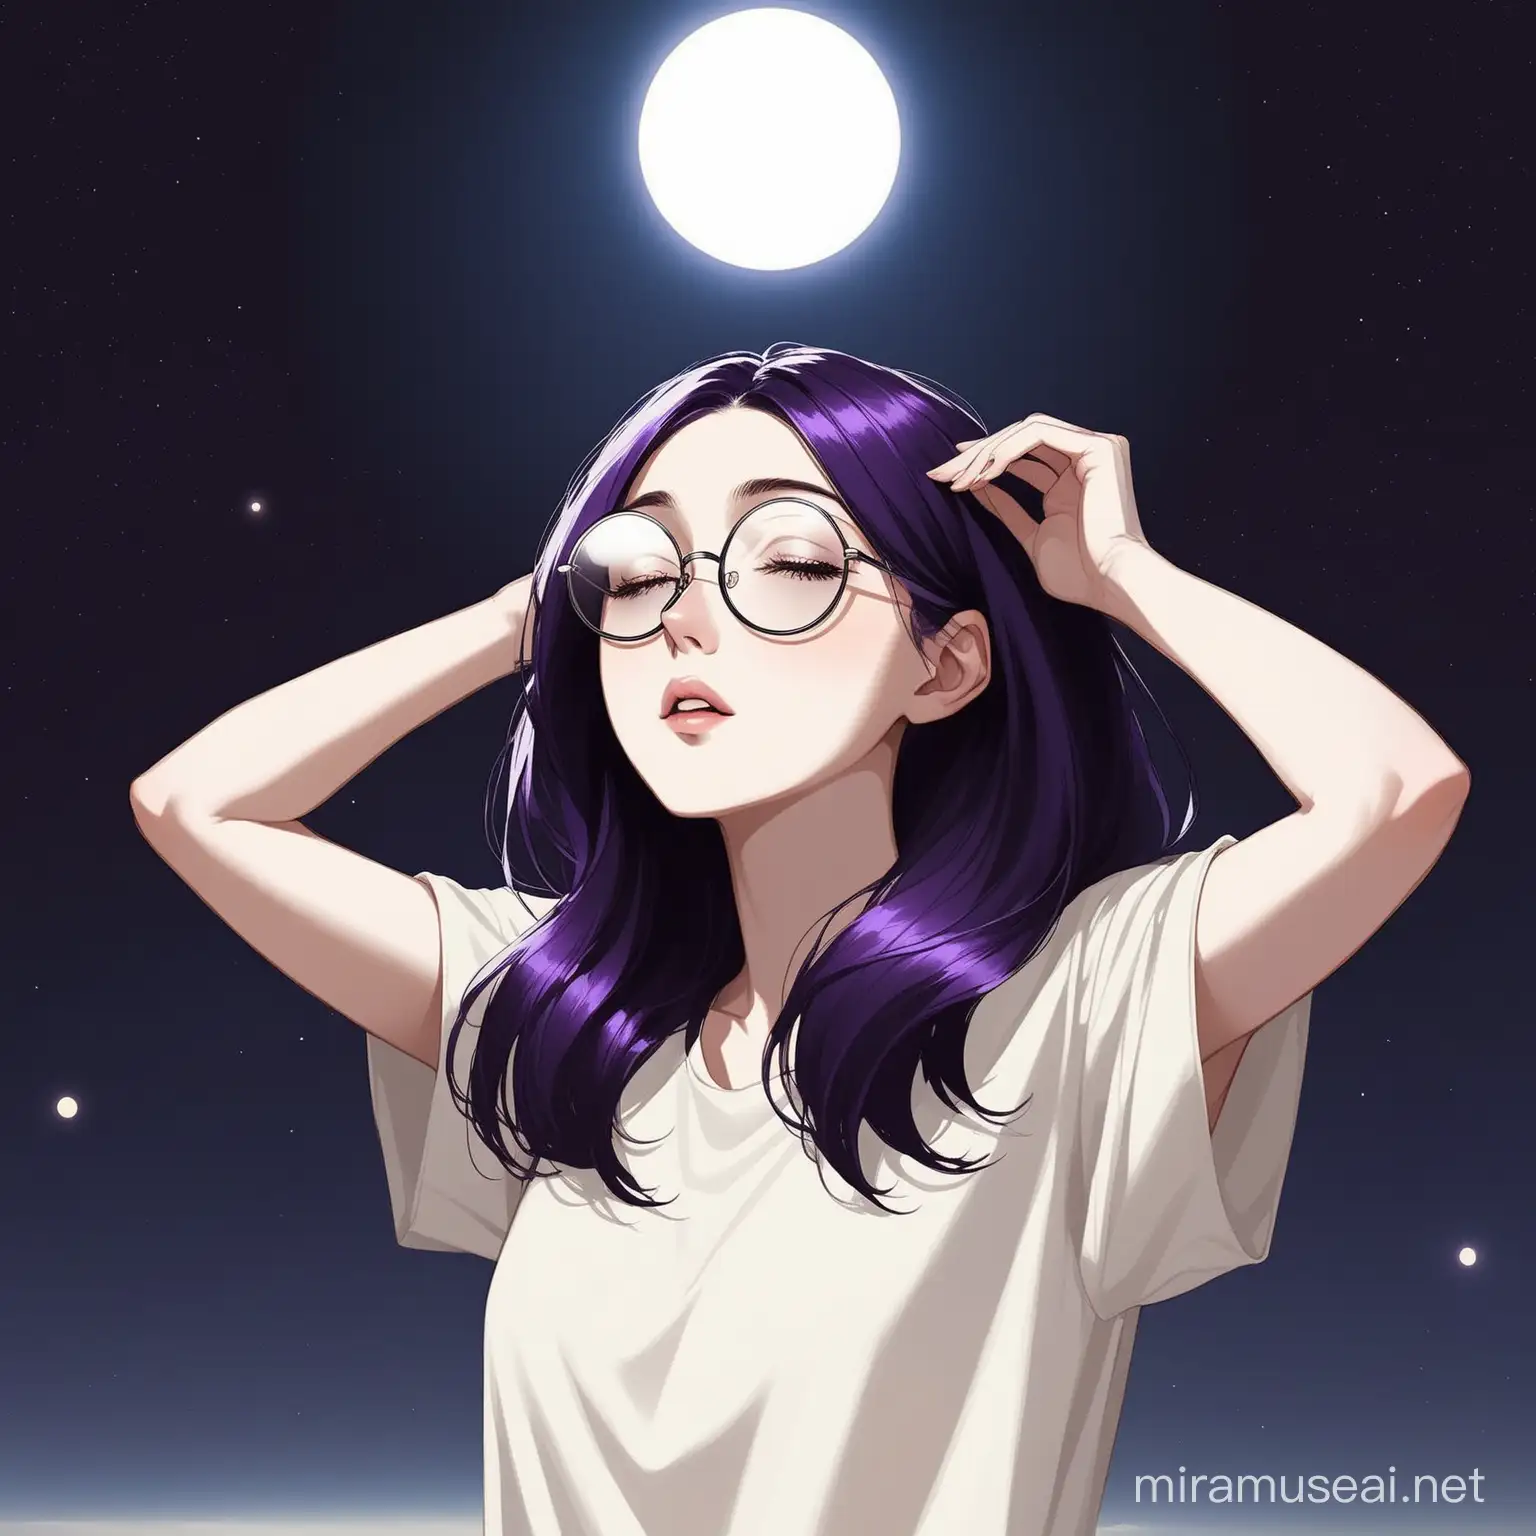 Stylish Woman with Round Glasses Amidst Total Eclipse